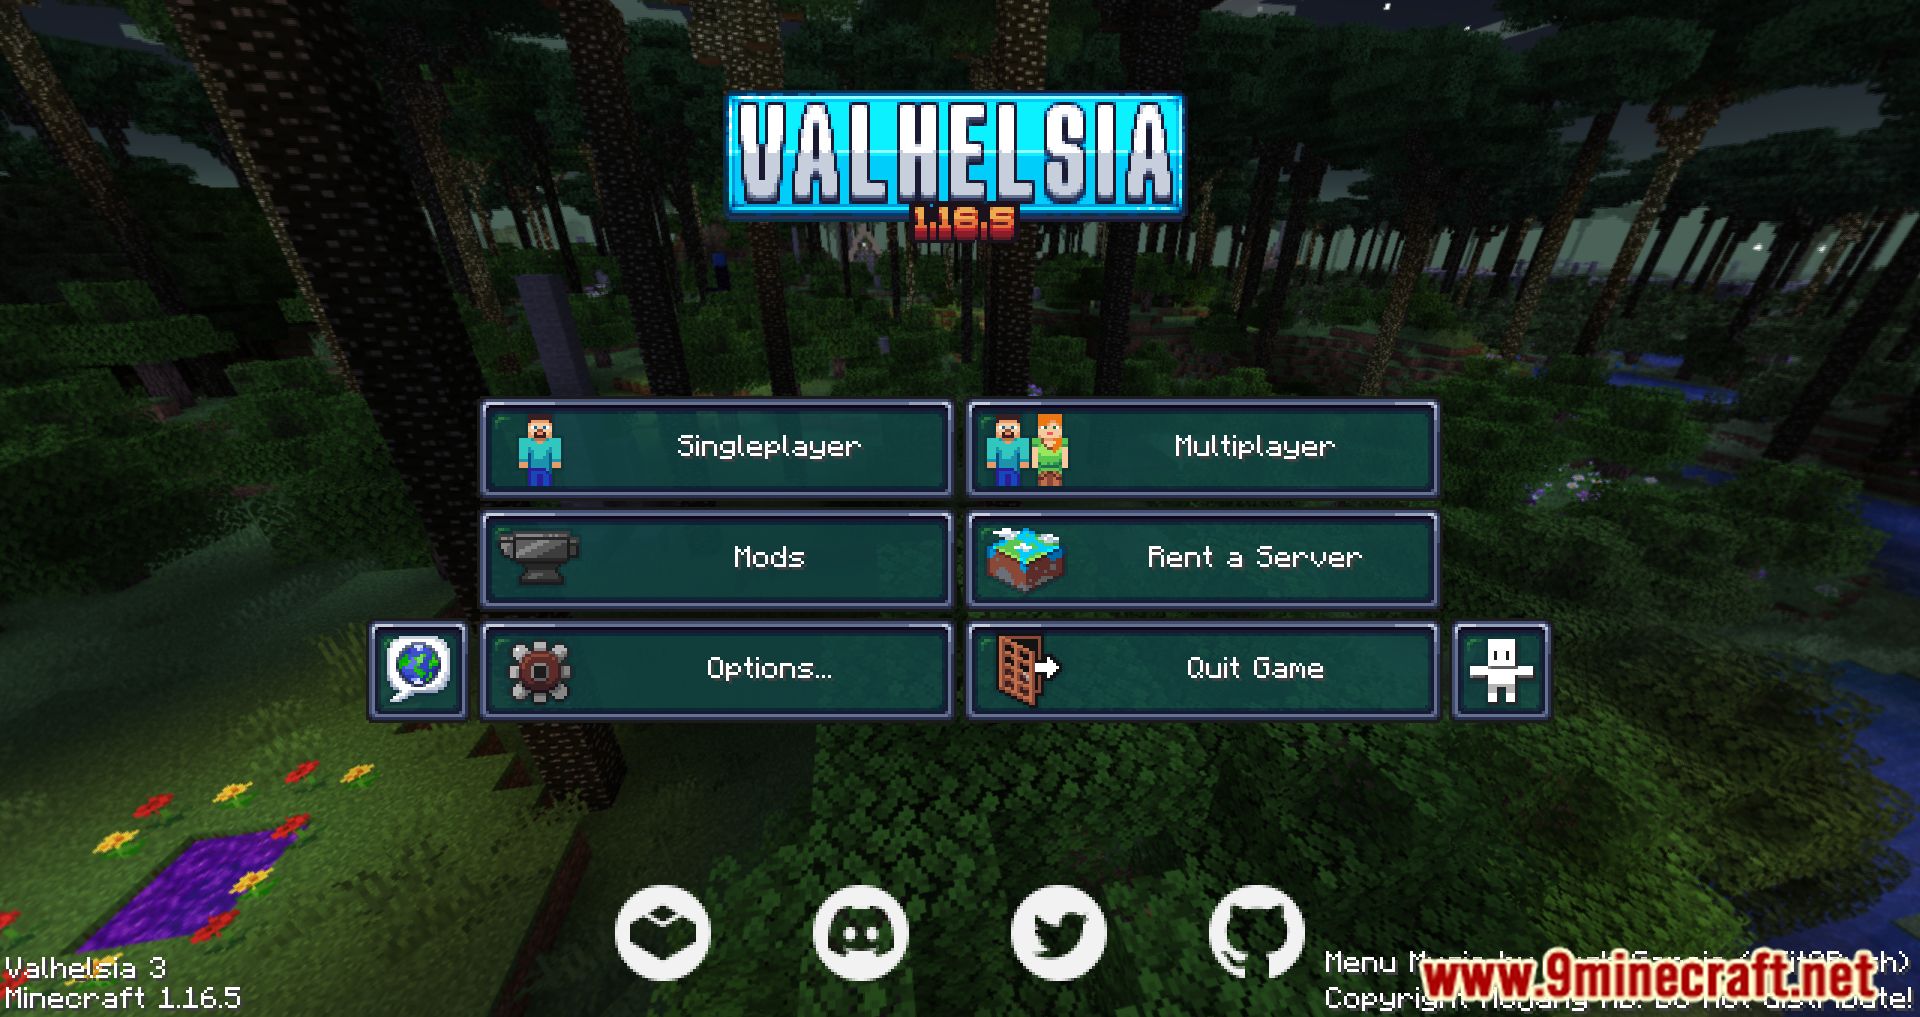 Valhelsia 3 Modpack (1.16.5) - A New World Is Waiting For You 2